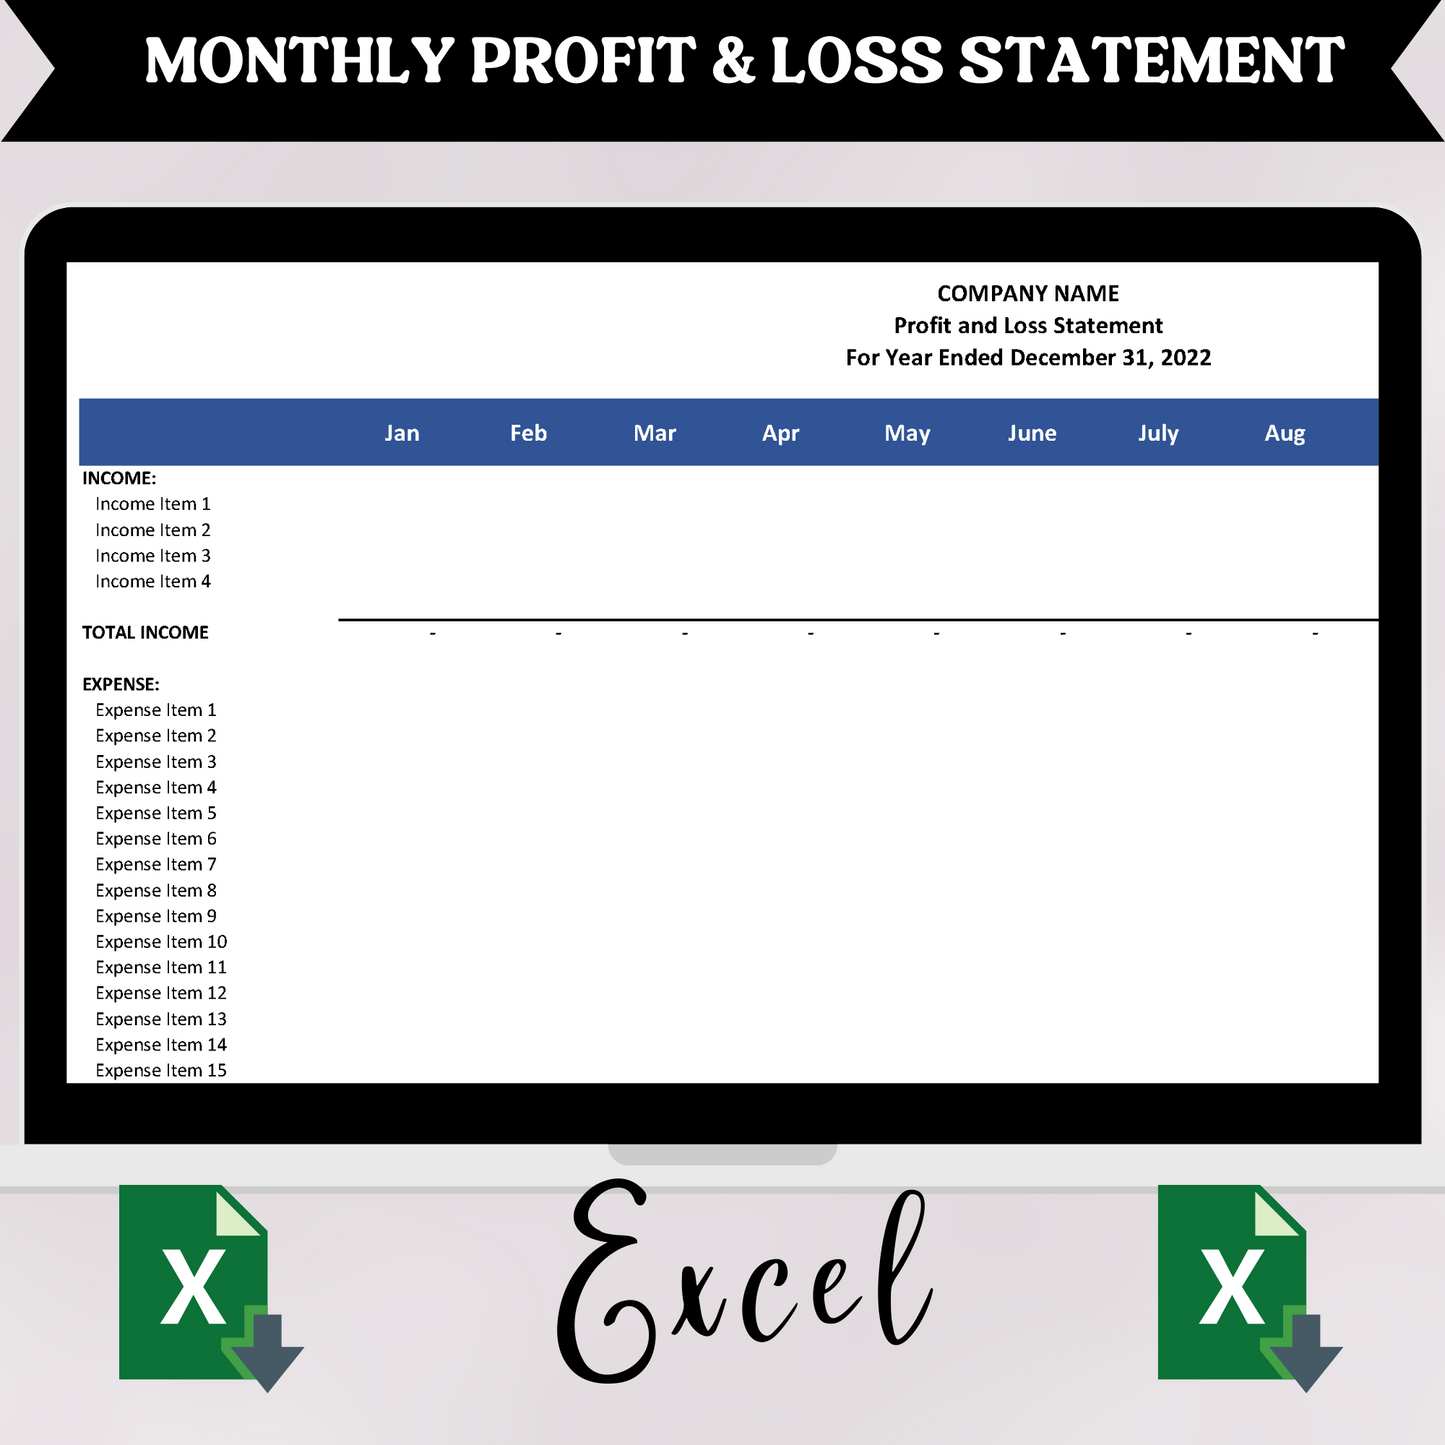 Monthly Profit & Loss